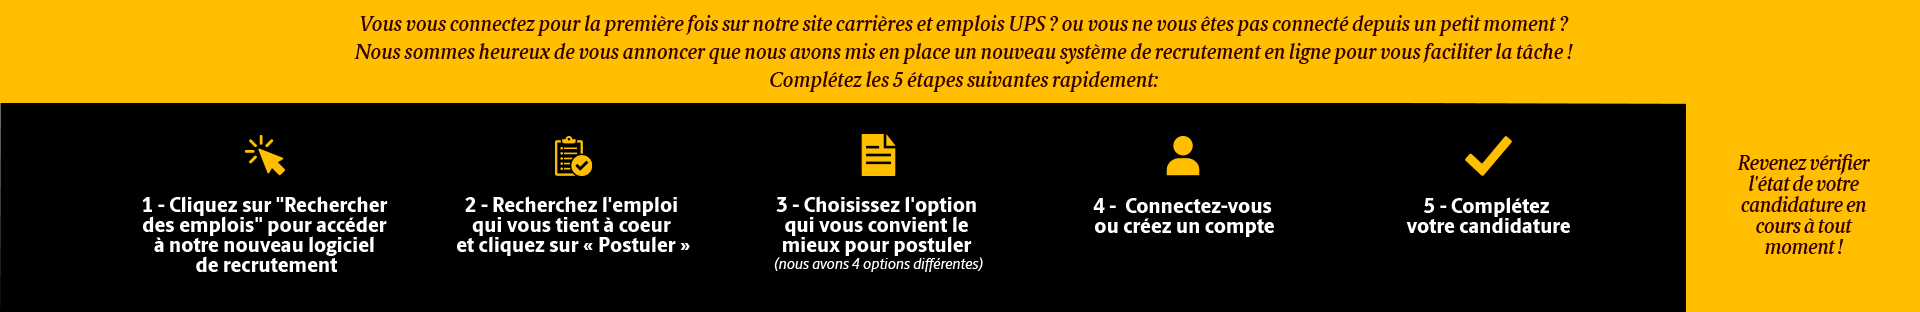 New to UPS? or Maybe you haven't stopped by in a while?  We are happy to share that we have a new system in place to make applying easier for you! 5 Steps: (1) Click 'Search Jobs' to go to our application system. (2) Find your job & click 'Apply' (3) Choose your Application Method (4) Login or create an account (5) Complete your application. Come back & check the status of your application at any time!